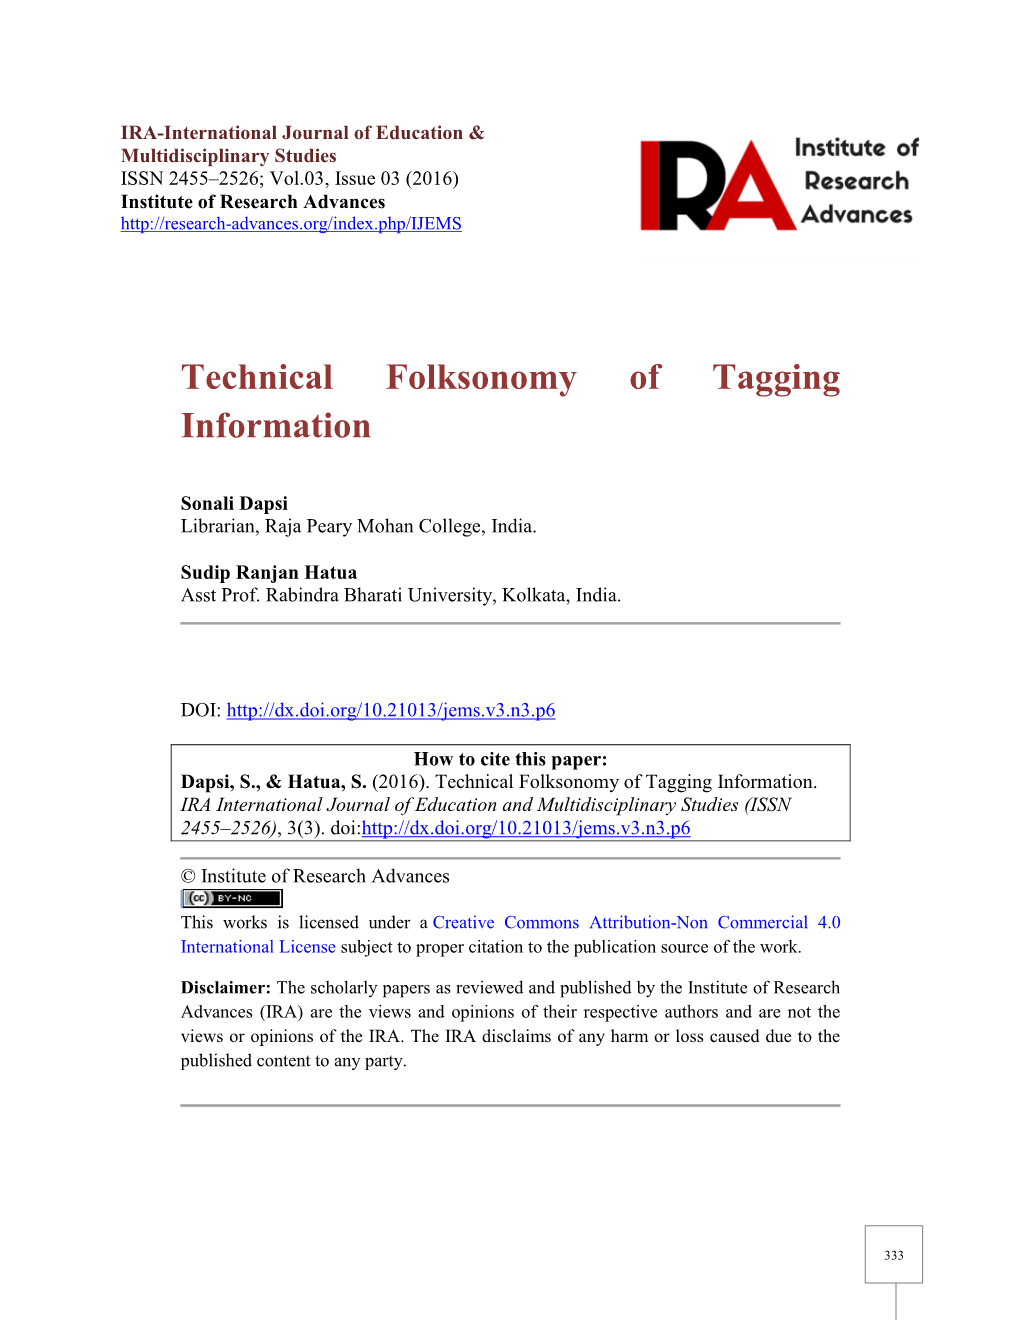 Technical Folksonomy of Tagging Information